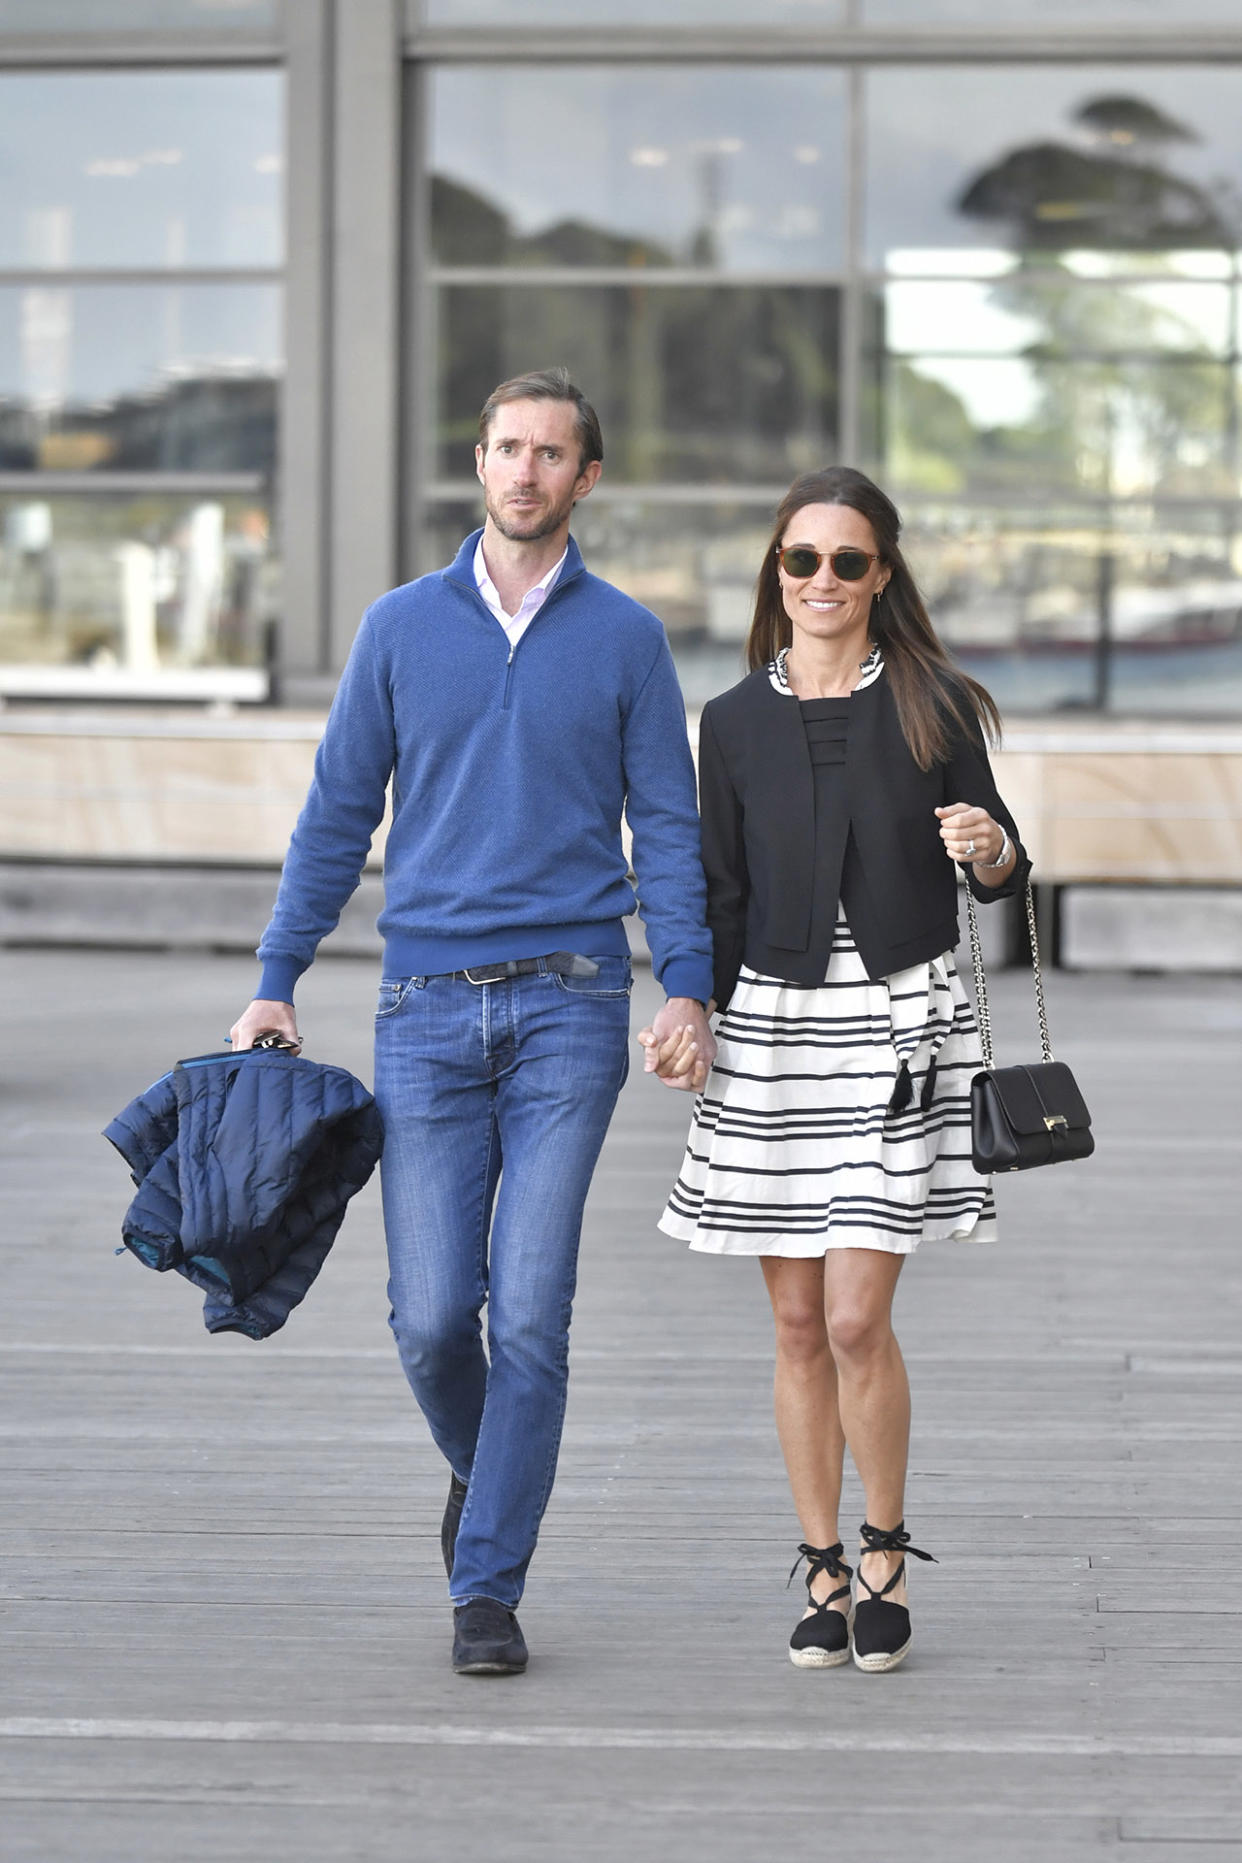 Pippa Middleton and new husband James Matthews are seen getting on a water taxi in Sydney harbour during their honeymoon<P>Pictured: Pippa Middleton and James Matthews<B>Ref: SPL1410918  310517  </B><BR/>Picture by: Splash News<BR/></P><P><B>Splash News and Pictures</B><BR/>Los Angeles:310-821-2666<BR/>New York:212-619-2666<BR/>London:870-934-2666<BR/>photodesk@splashnews.com<BR/></P>